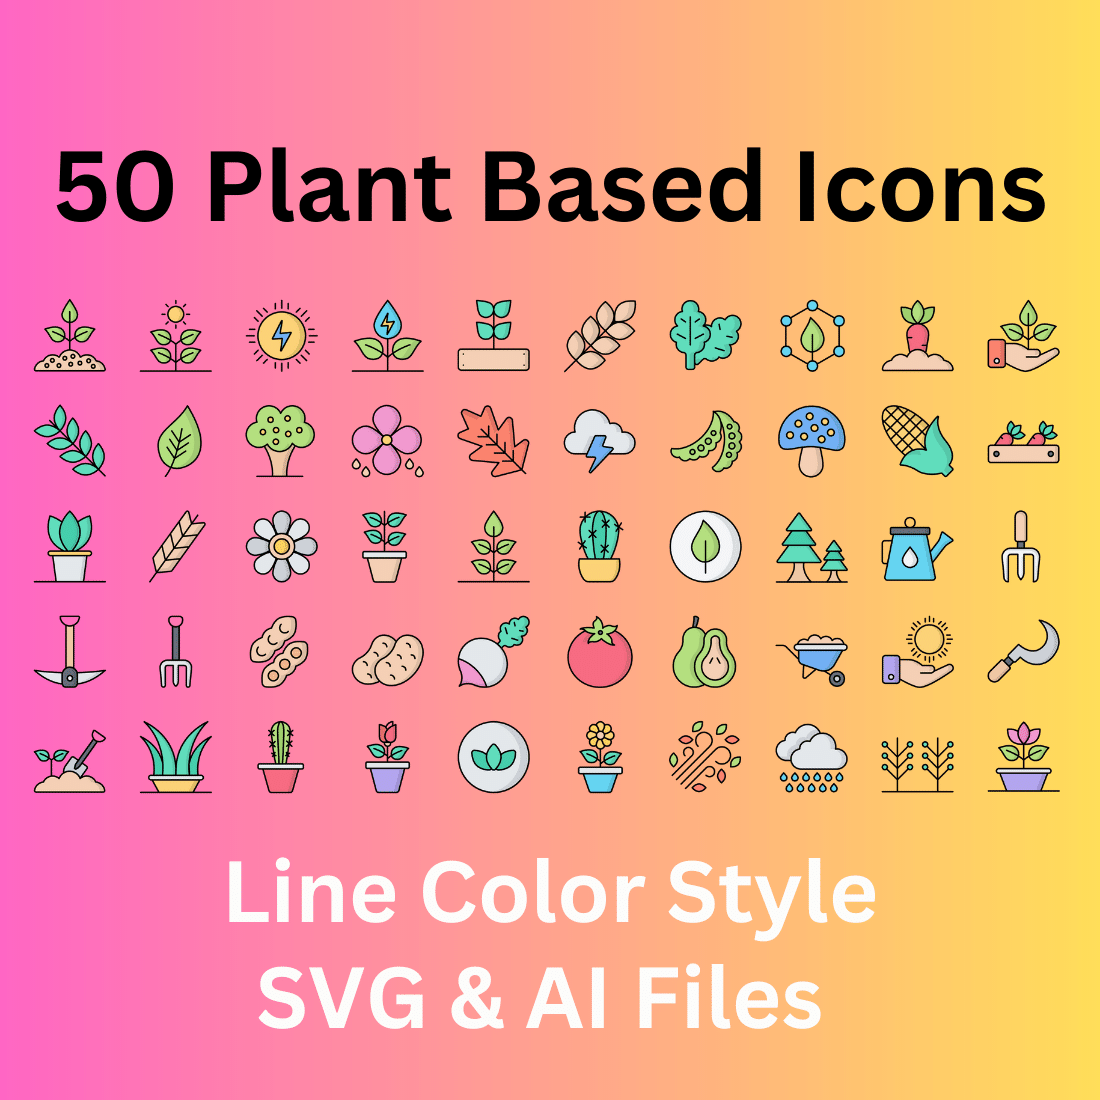 Plant Based Icon Set 50 Line Color Icons - SVG And AI Files cover image.